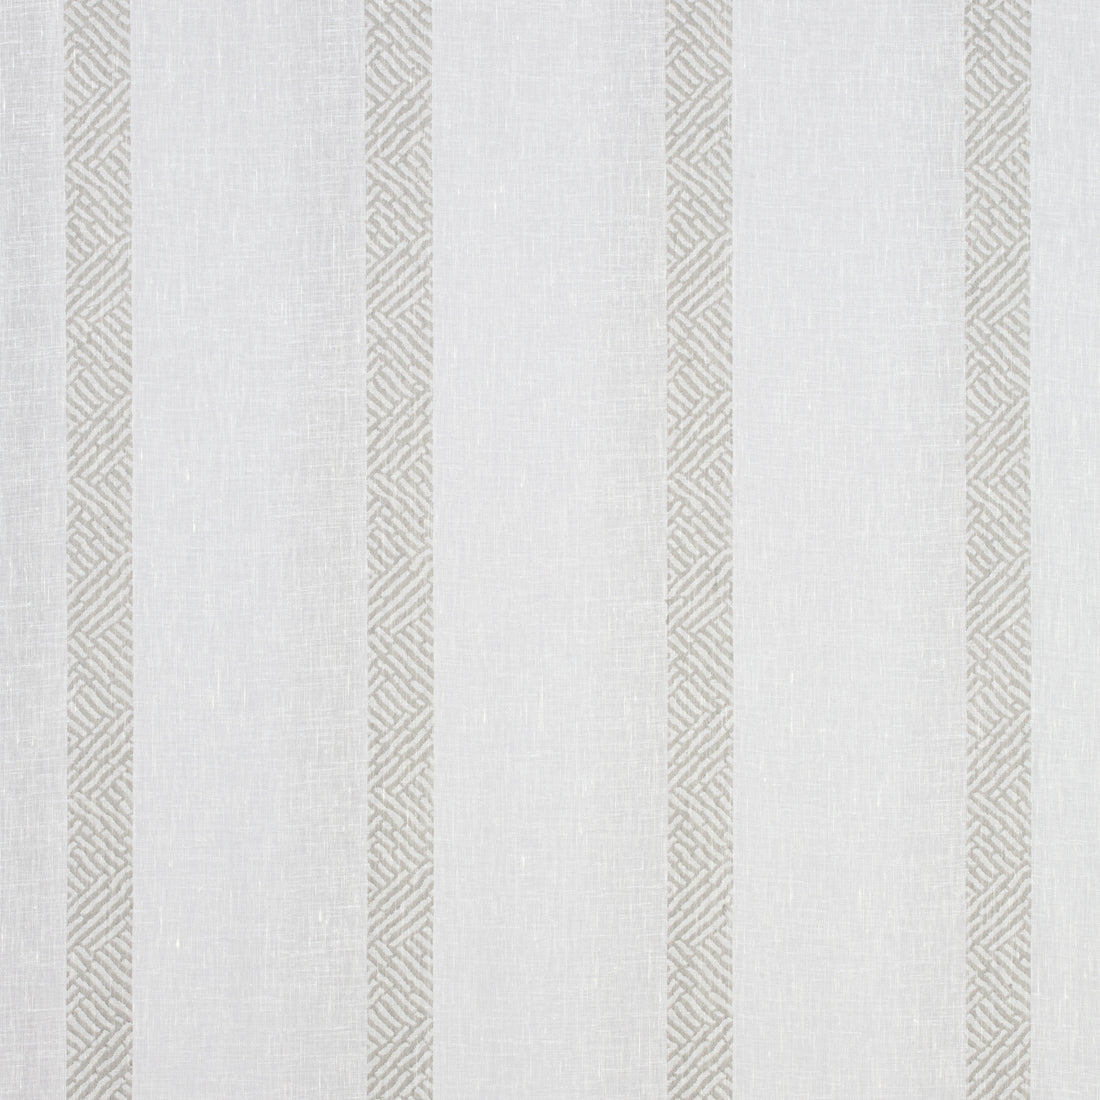 Cobble Hill Stripe fabric in smoke color - pattern number FWW7125 - by Thibaut in the Atmosphere collection